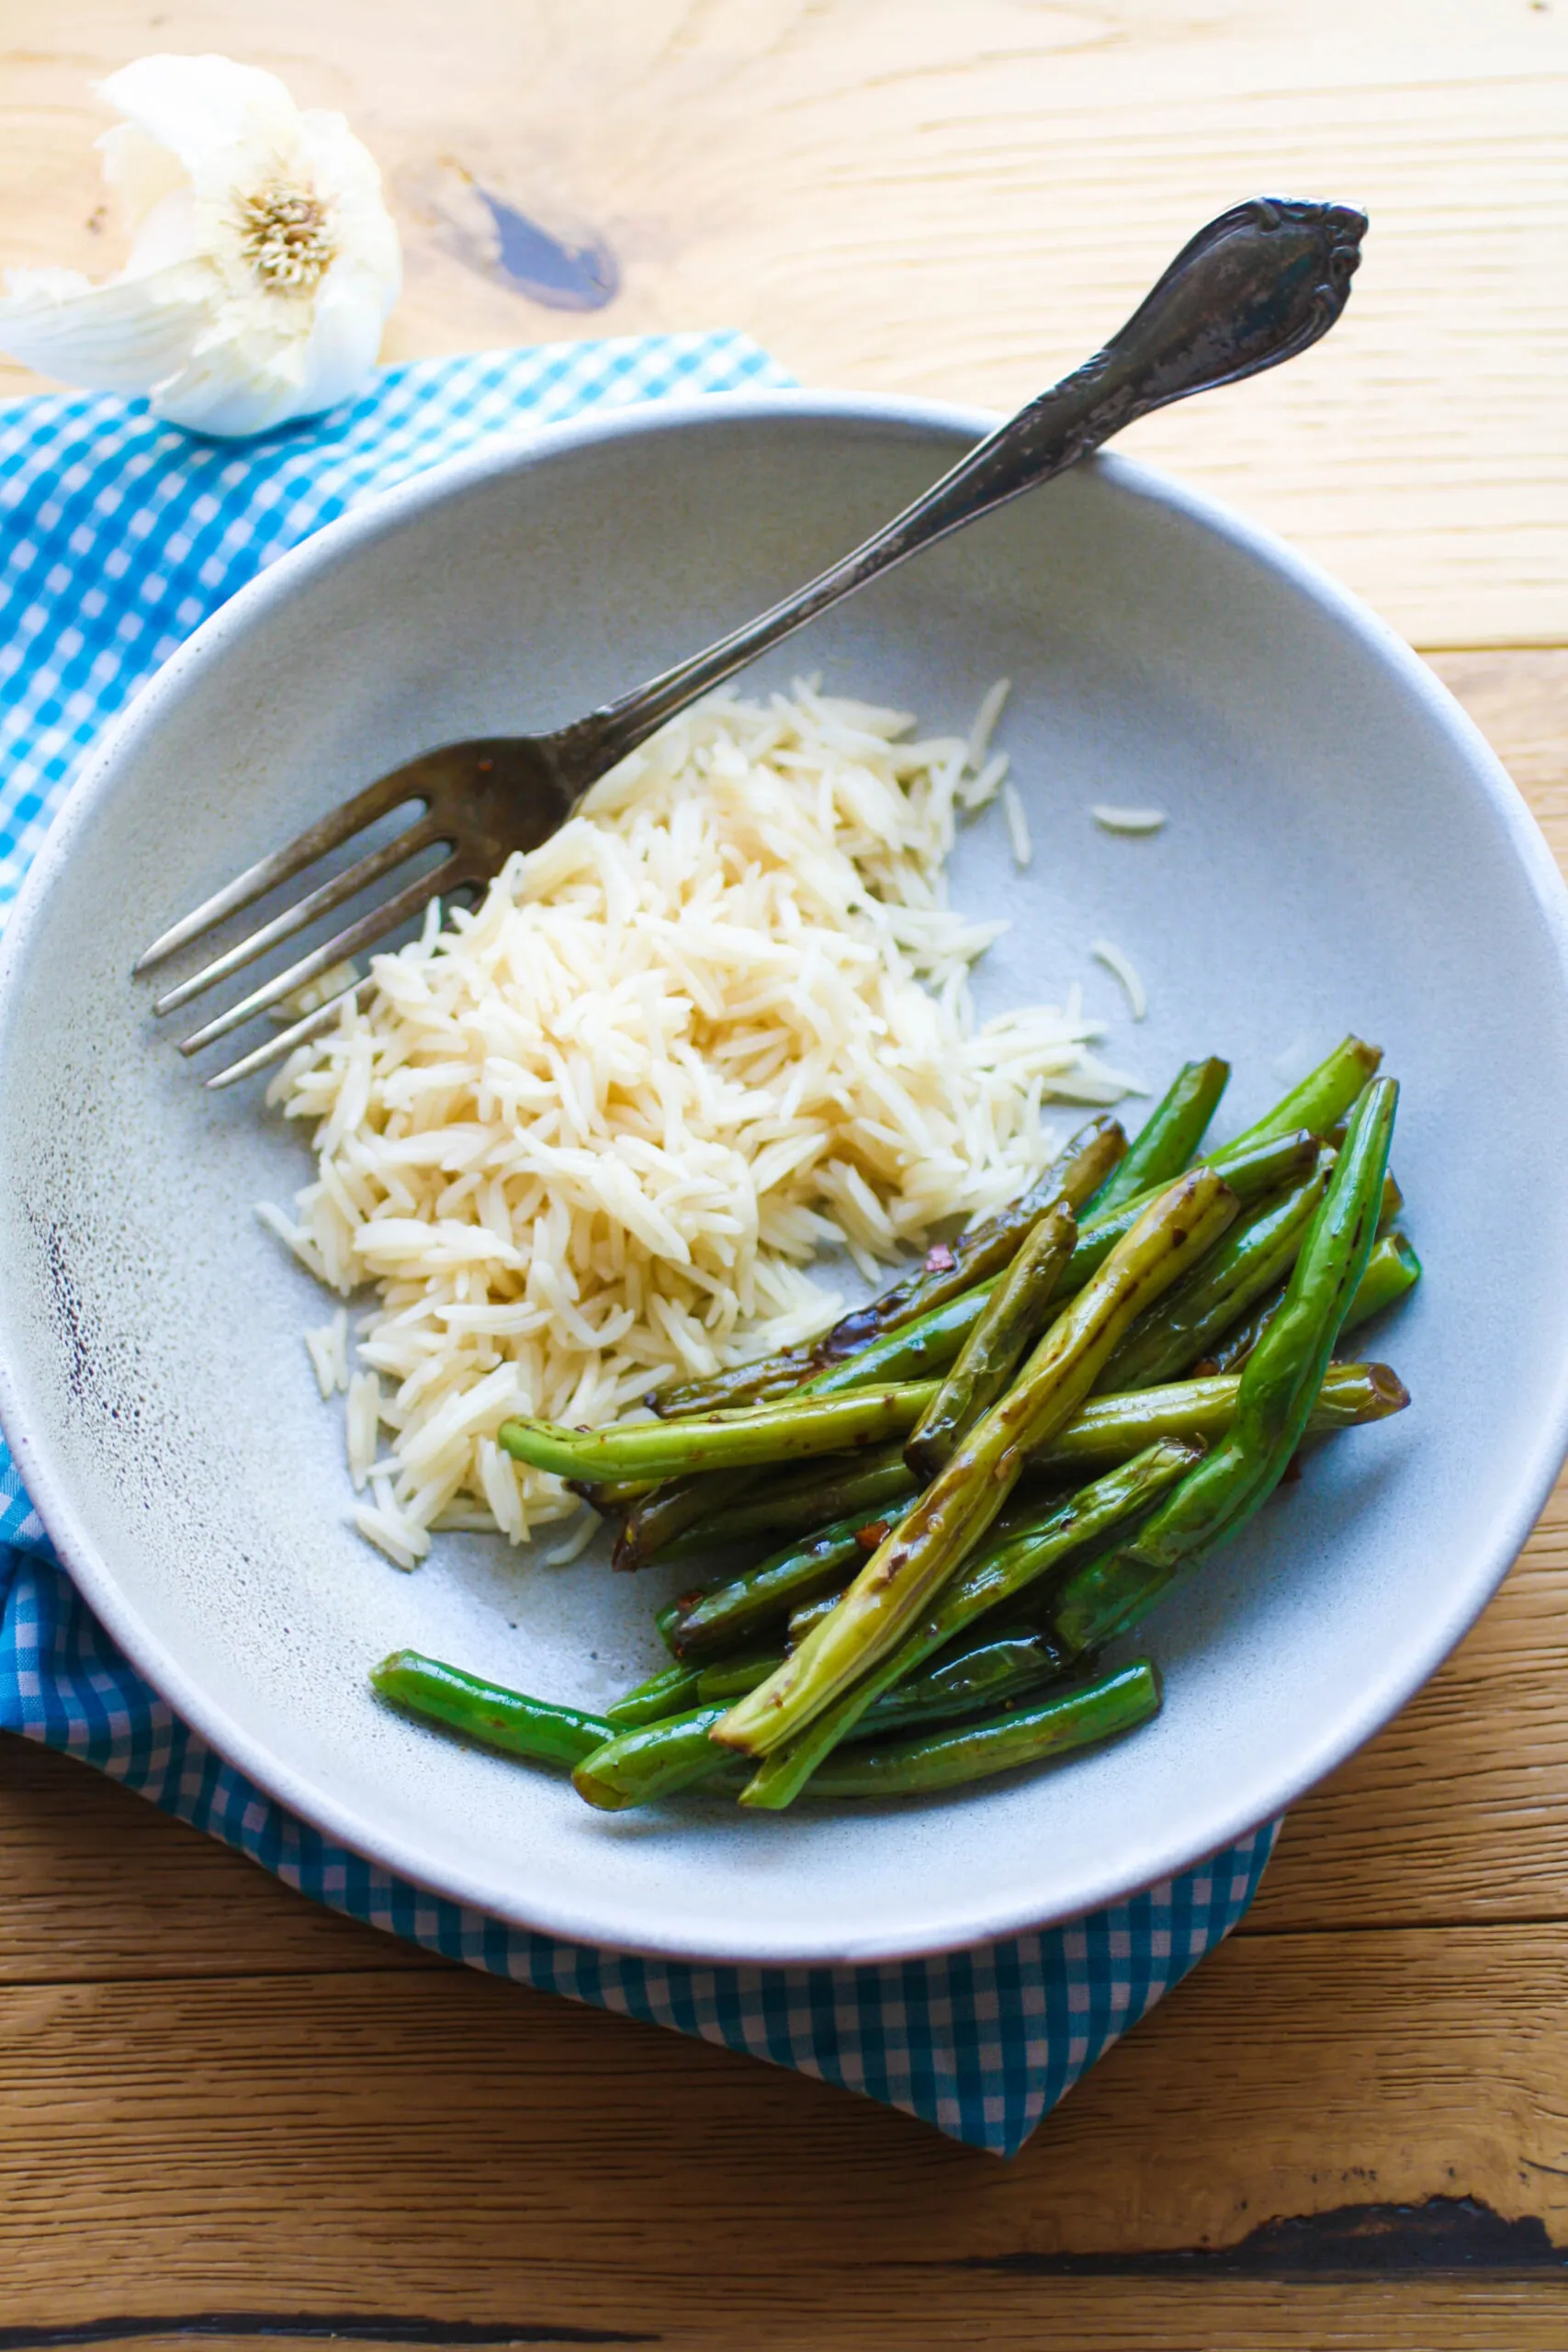 Balsamic green beans as a side dish.